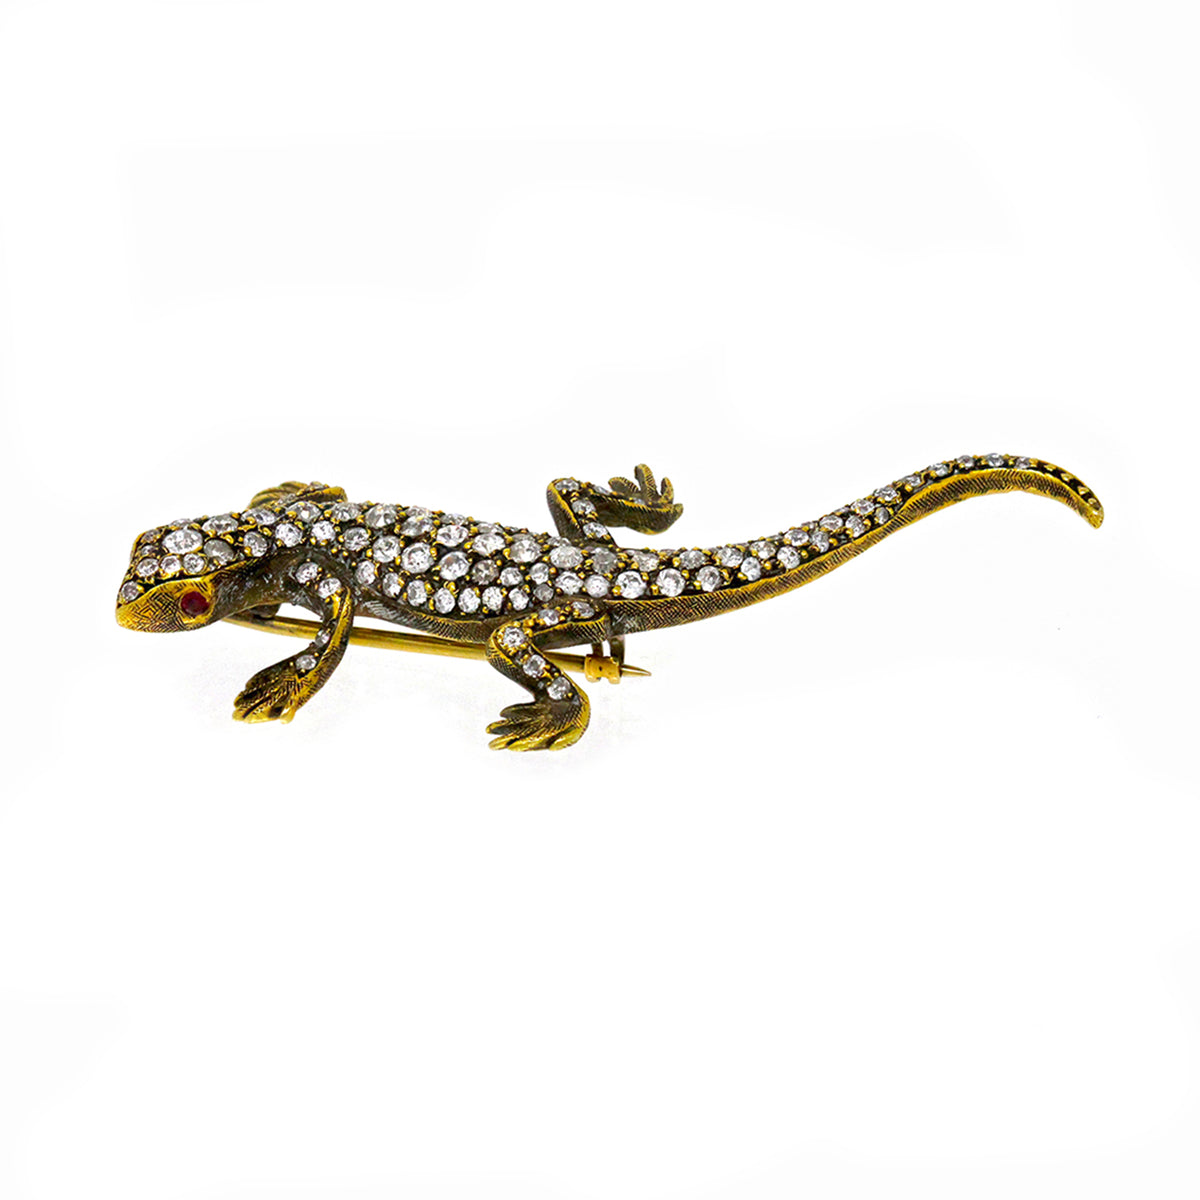 1960s 18 Karat Yellow Gold Gecko Brooch with Diamonds and Rubies side view